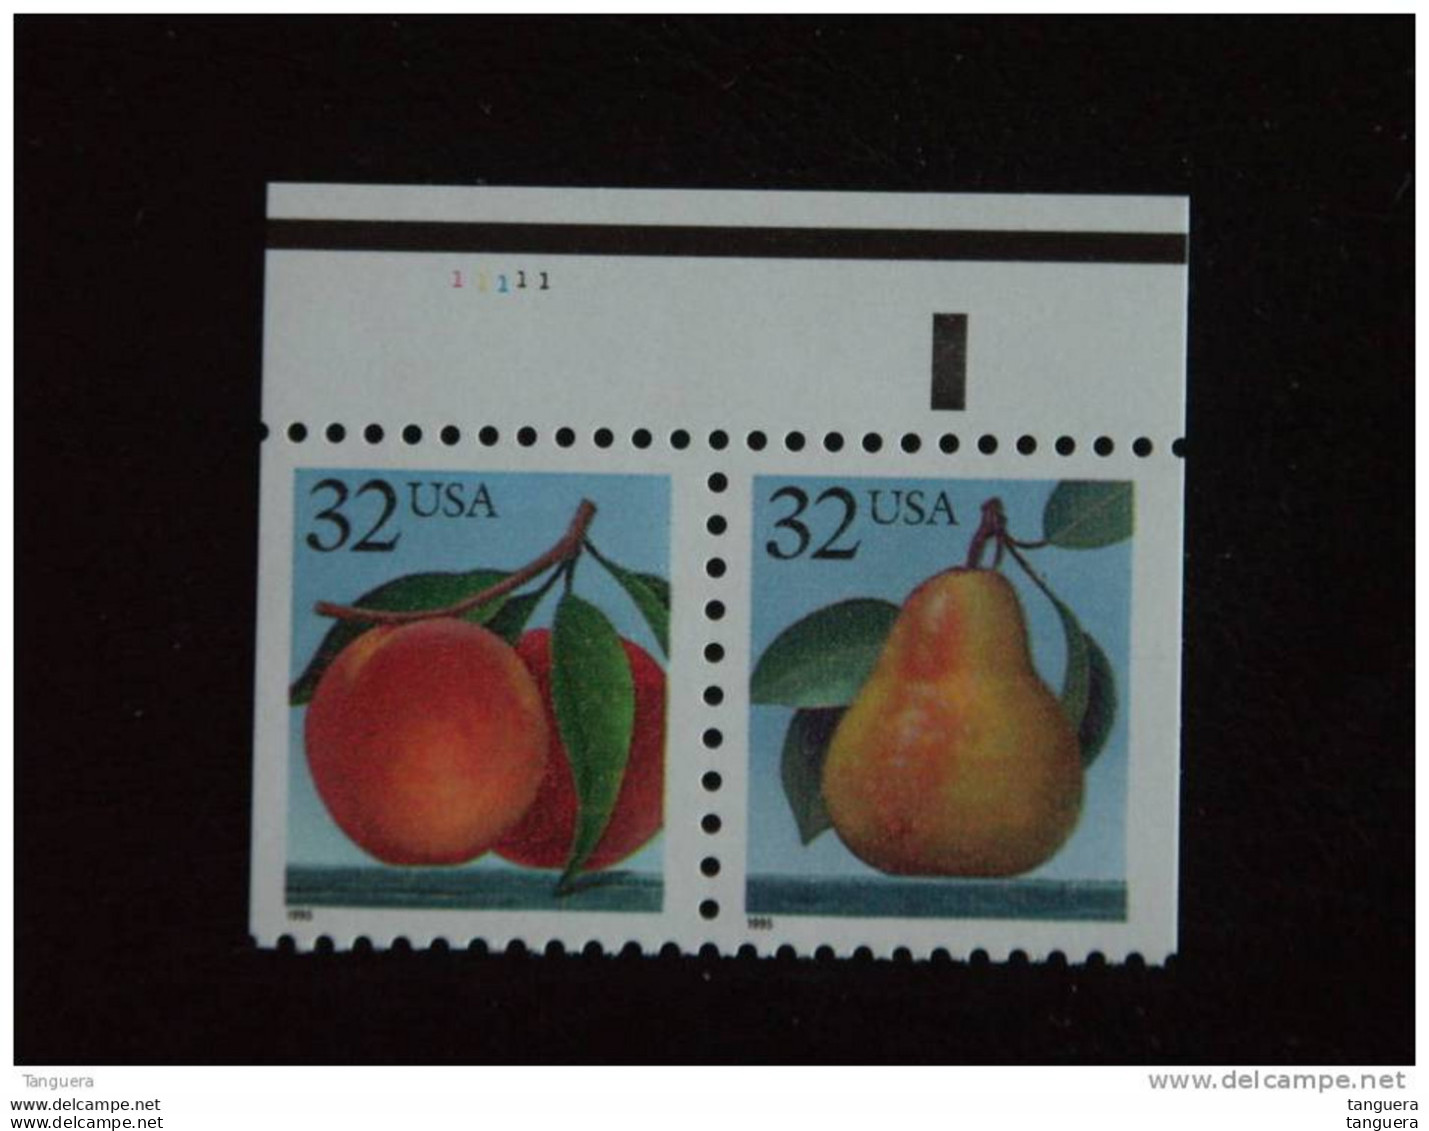 USA Etats-Unis United States 1995 Peaches And Pears Fruit Yv 2382-2383 MNH ** Plate N° 1111 - Ungebraucht